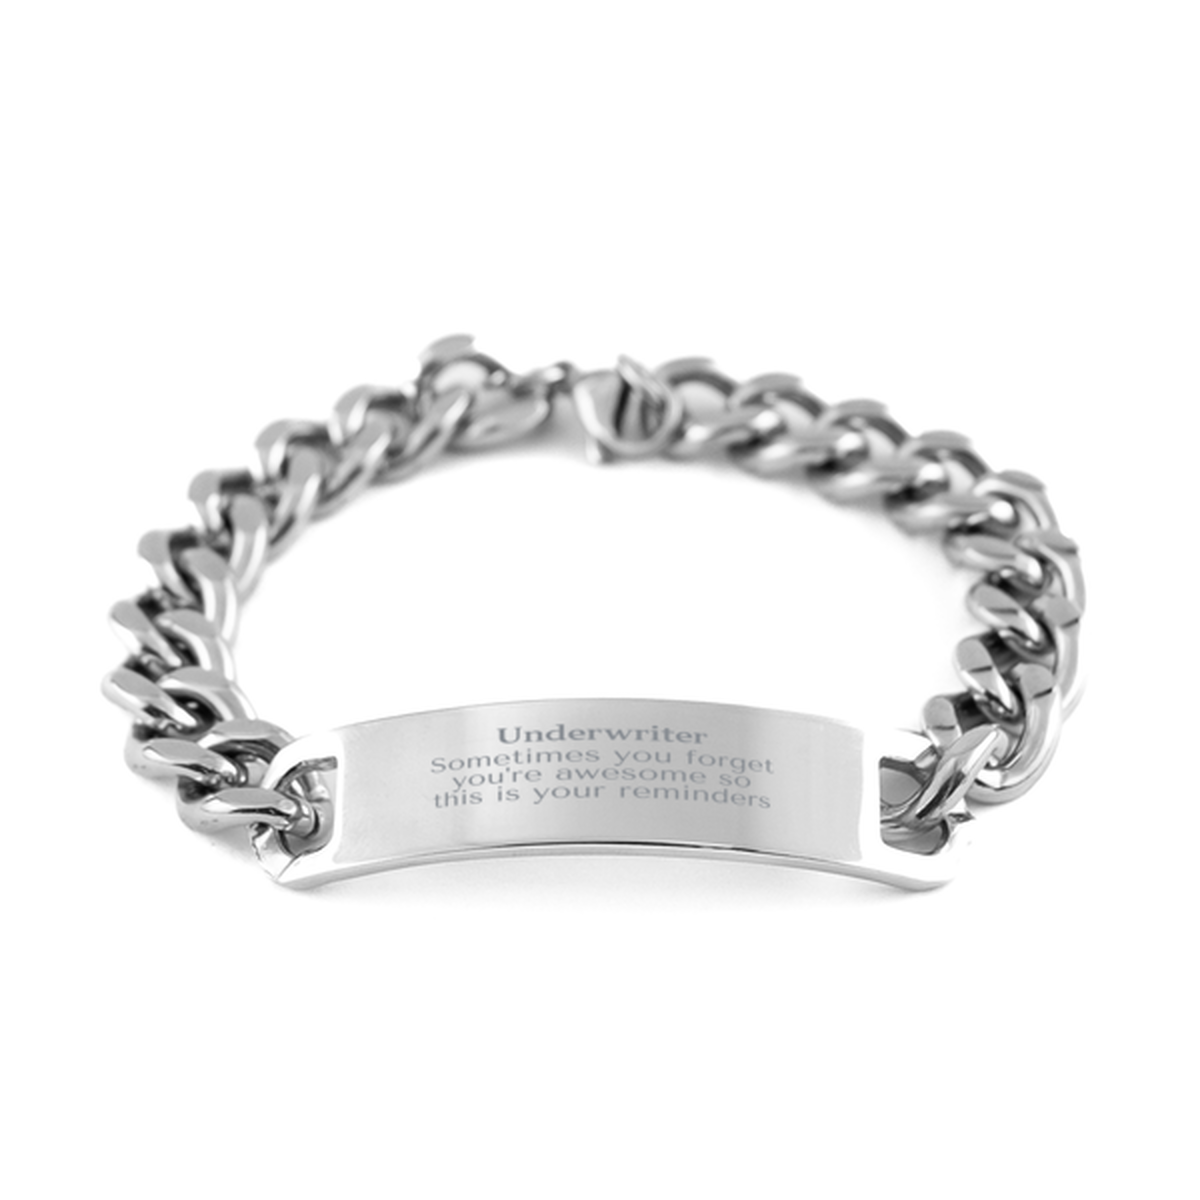 Sentimental Underwriter Cuban Chain Stainless Steel Bracelet, Underwriter Sometimes you forget you're awesome so this is your reminders, Graduation Christmas Birthday Gifts for Underwriter, Men, Women, Coworkers